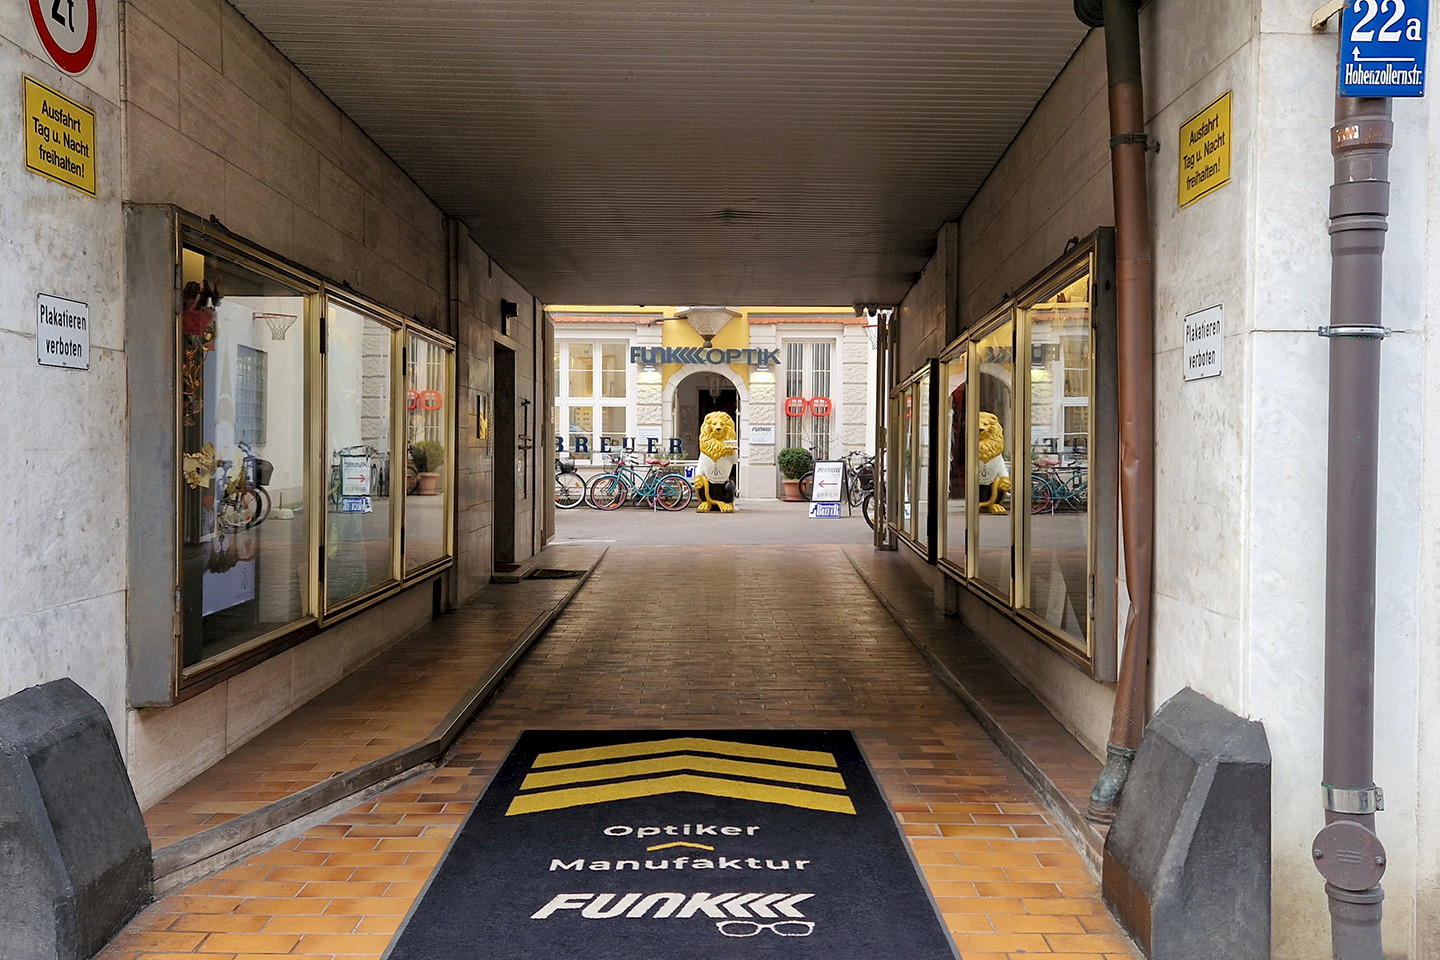 FUNK Optik in the rear building - the entrance situation seen from the street